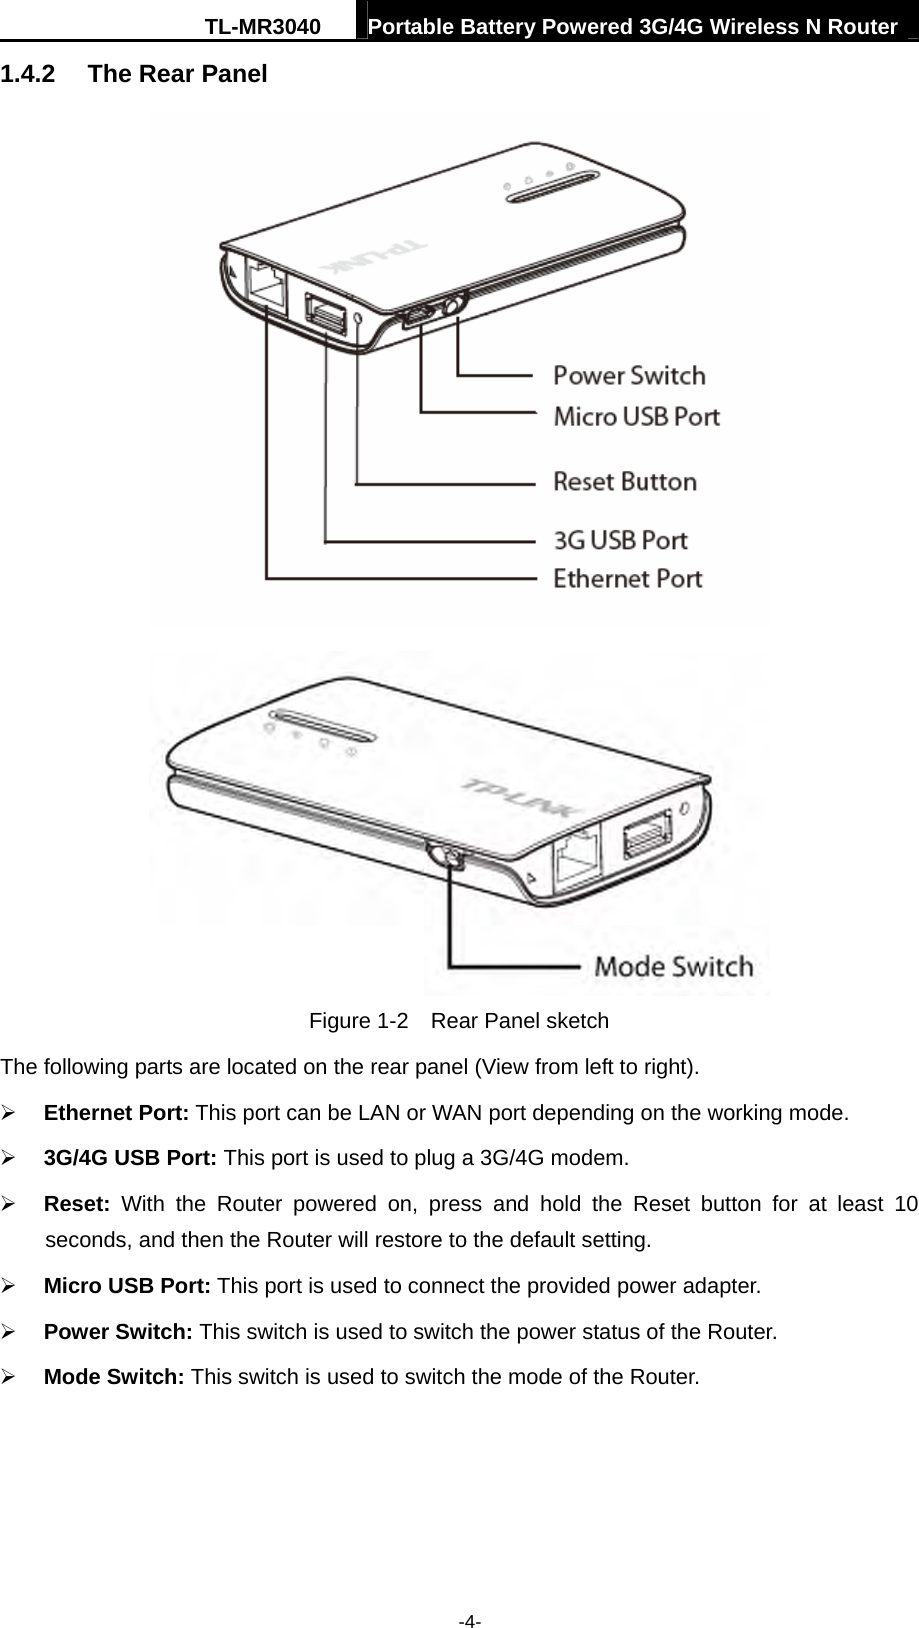 TL-MR3040  Portable Battery Powered 3G/4G Wireless N Router  -4- 1.4.2  The Rear Panel   Figure 1-2    Rear Panel sketch The following parts are located on the rear panel (View from left to right). ¾ Ethernet Port: This port can be LAN or WAN port depending on the working mode. ¾ 3G/4G USB Port: This port is used to plug a 3G/4G modem.   ¾ Reset:  With the Router powered on, press and hold the Reset button for at least 10 seconds, and then the Router will restore to the default setting.   ¾ Micro USB Port: This port is used to connect the provided power adapter. ¾ Power Switch: This switch is used to switch the power status of the Router. ¾ Mode Switch: This switch is used to switch the mode of the Router. 